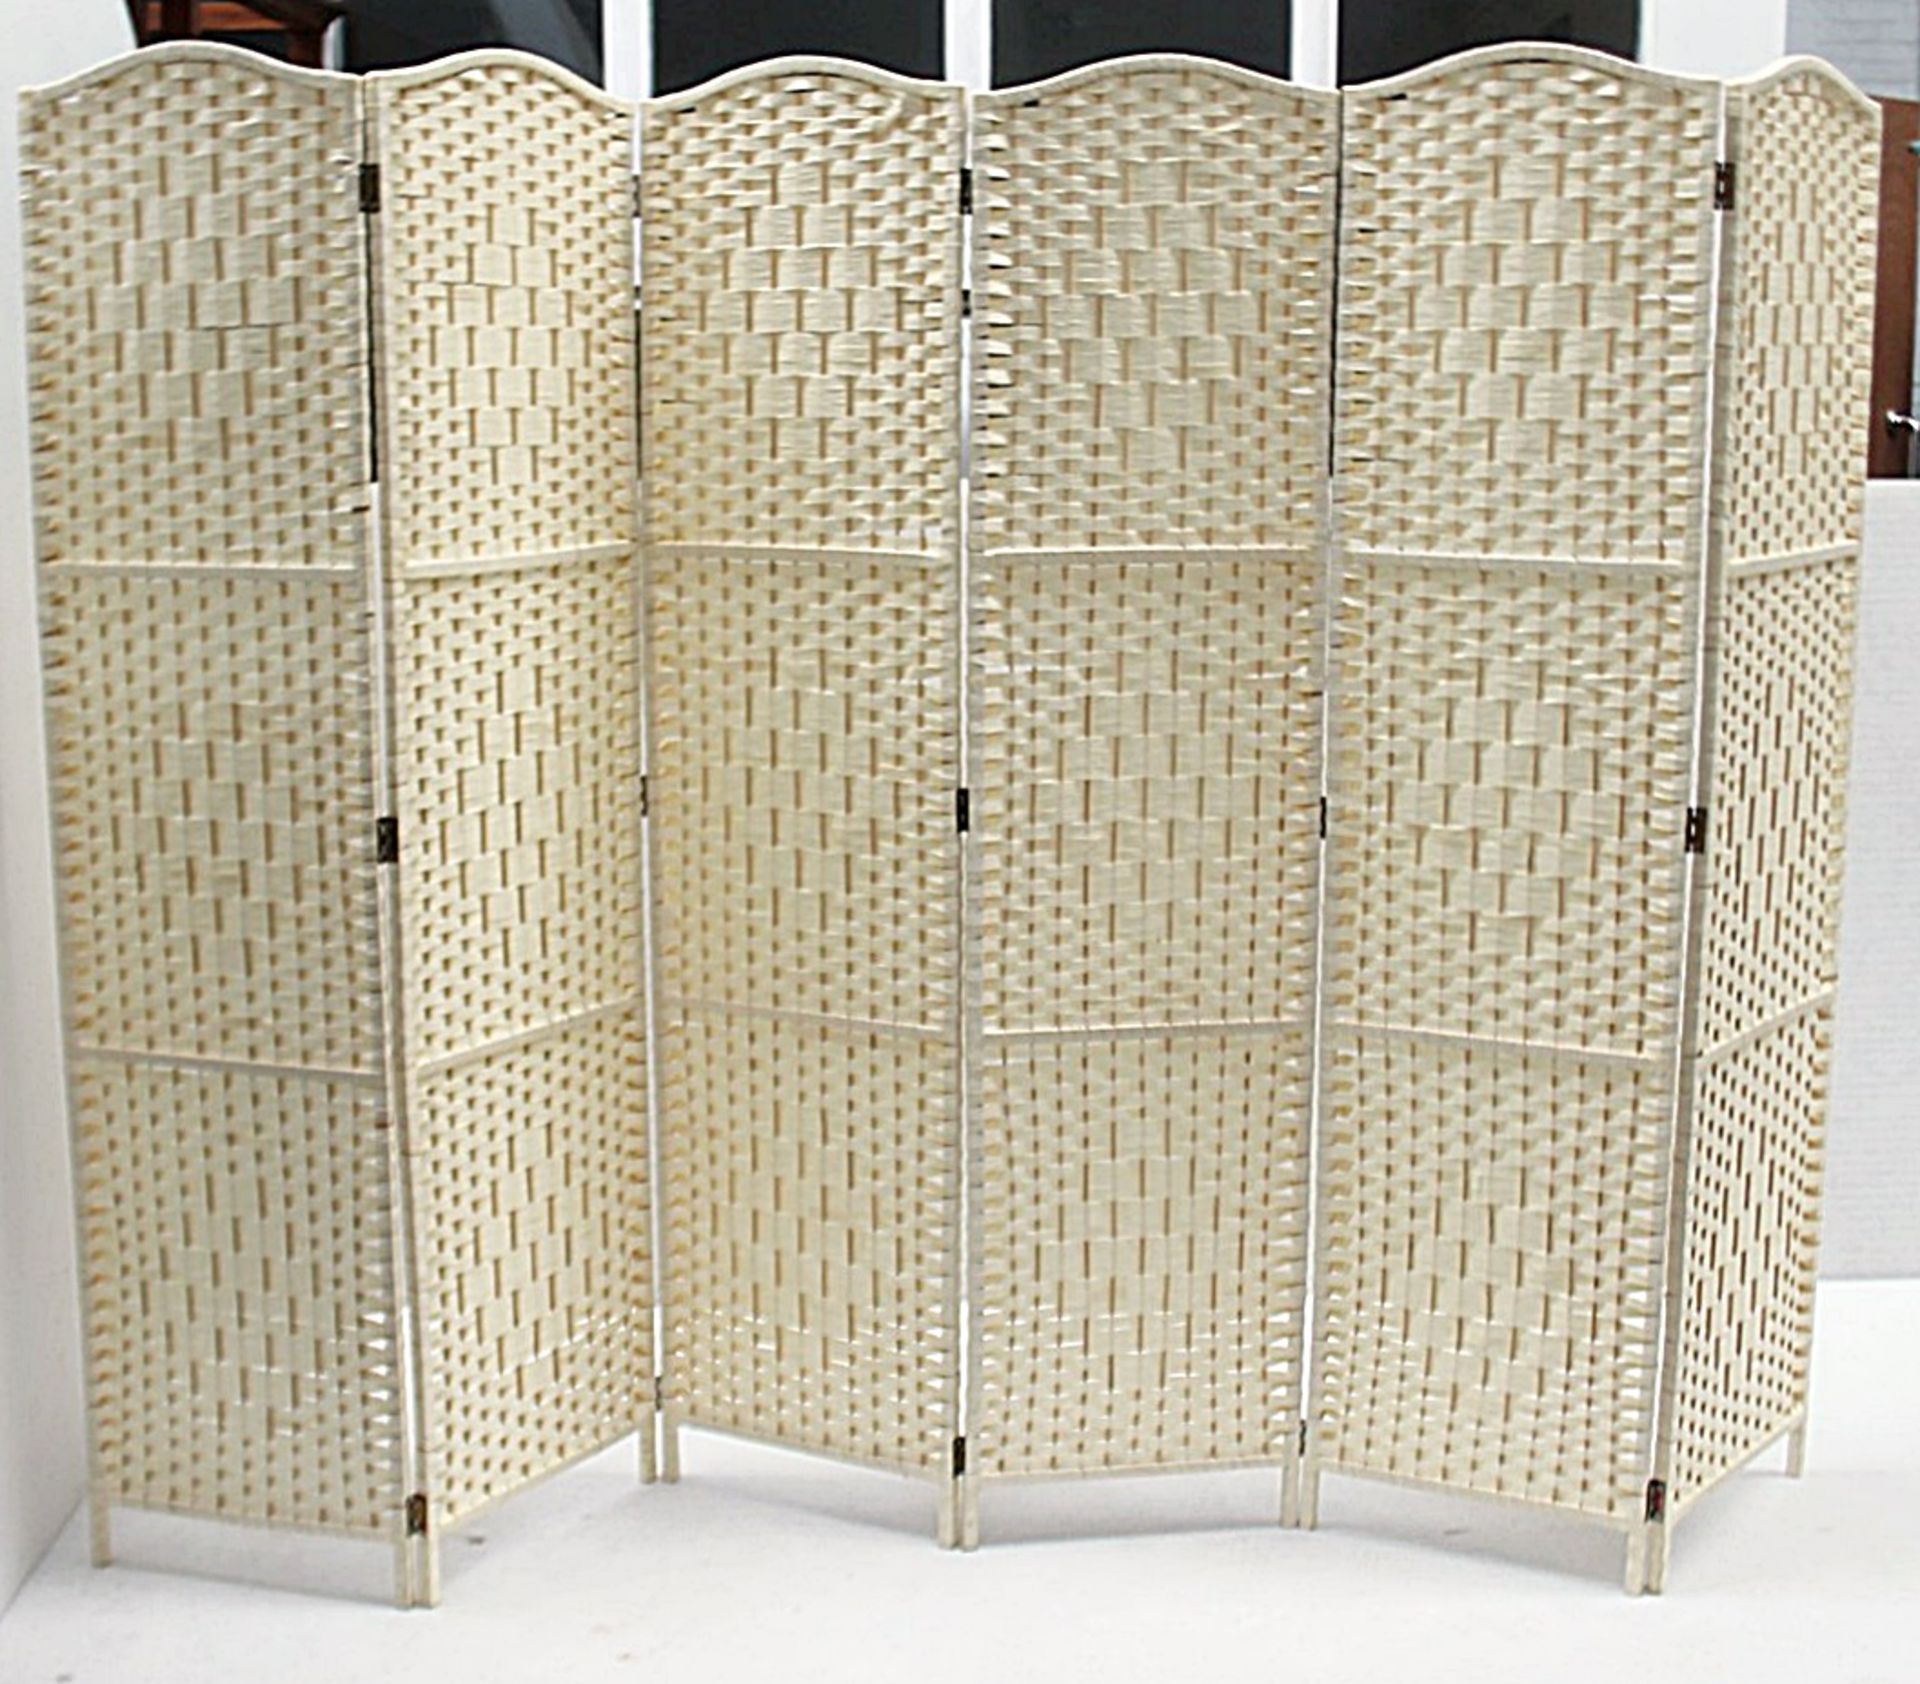 1 x Natural 6-Panel Dressing Screen - Recently Removed From A Designer Bridal Boutique